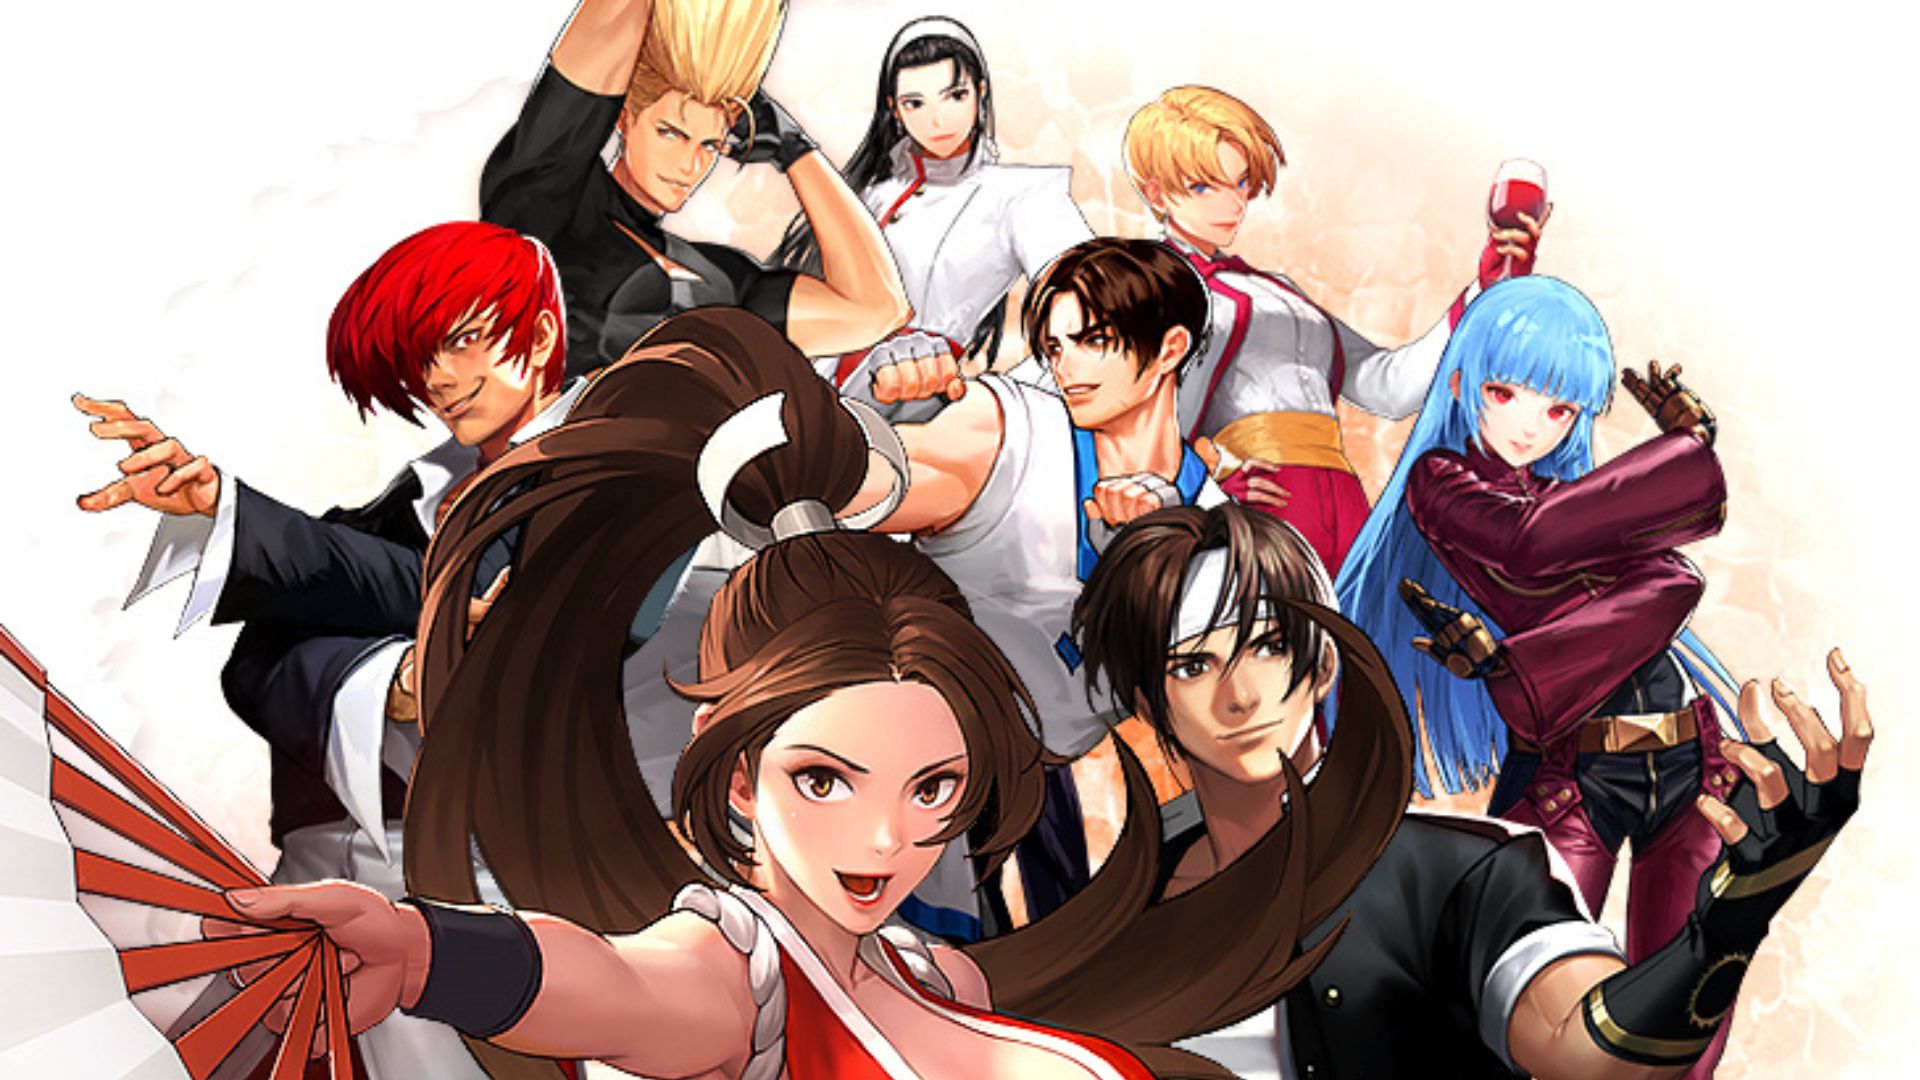 King of Fighters Survival City tactical mobile game comes out swinging